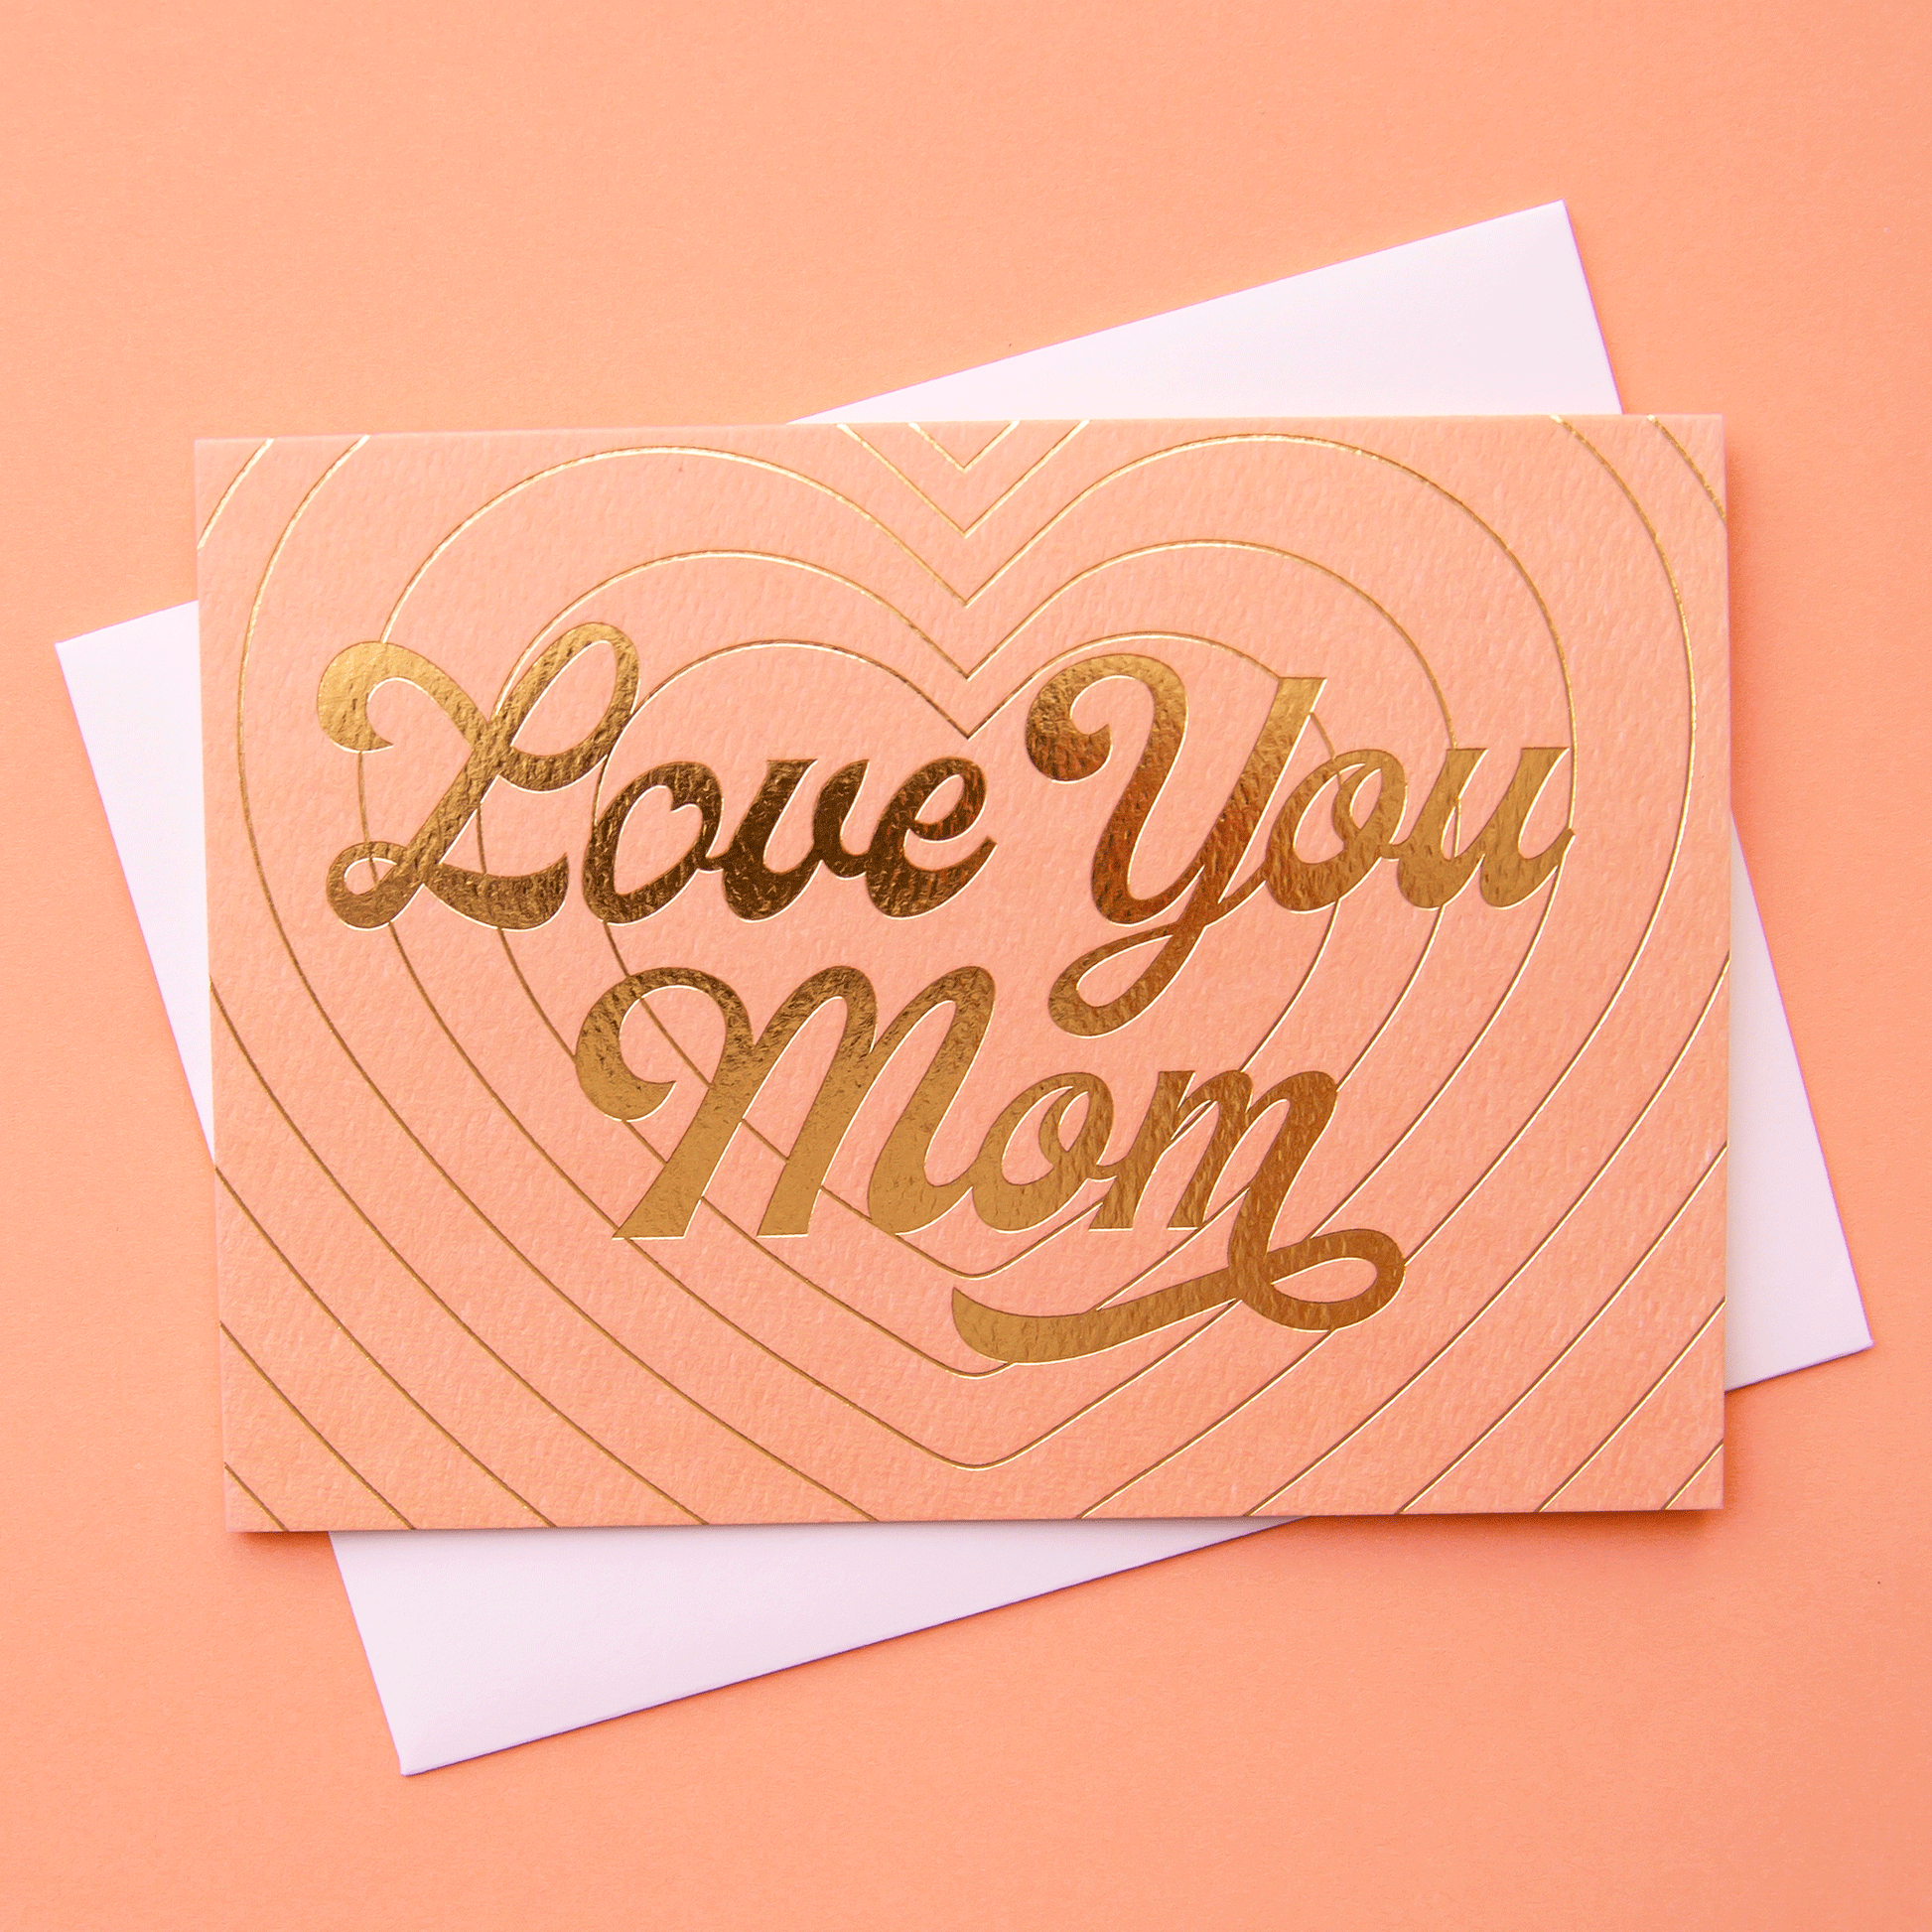 Peach card that reads 'love you mom' in gold foil. The card is filled with layers of a beaming gold foil heart design behind and is accompanied by with a white envelope.